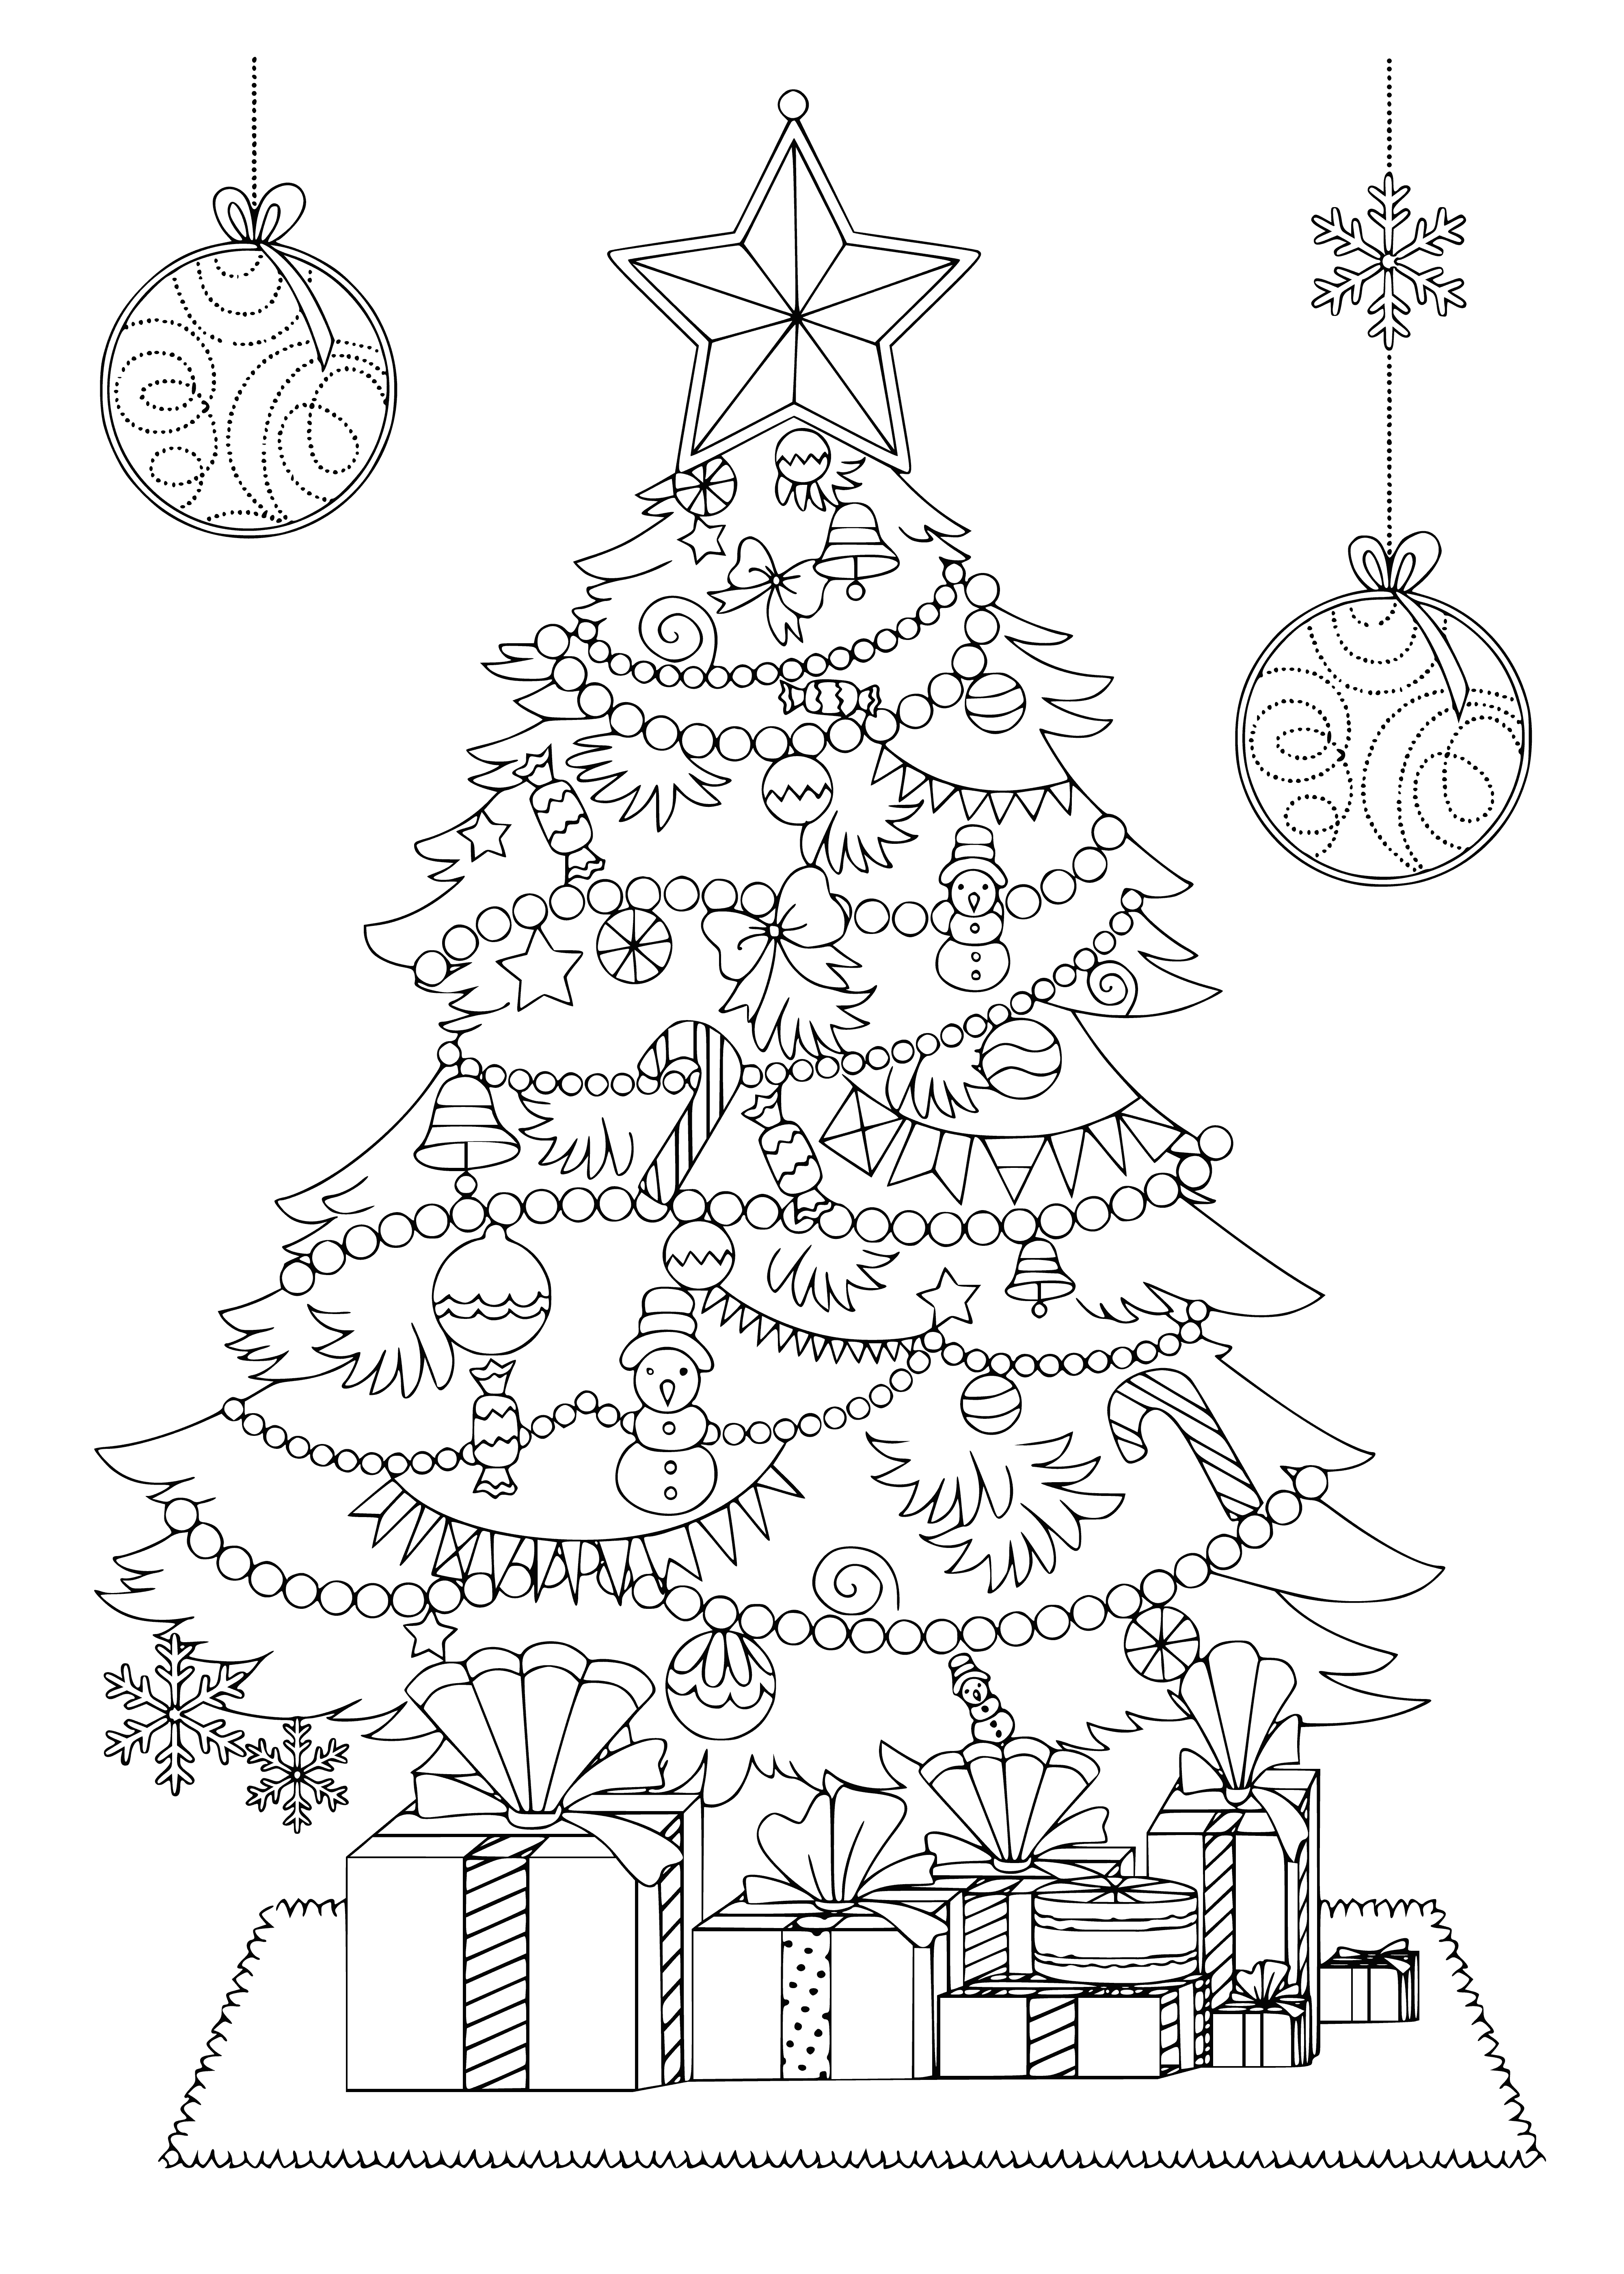 coloring page: Christmas tree in the center, prezzies wrapped in colors, candy canes n' gingerbread men. A beautiful holiday sight!